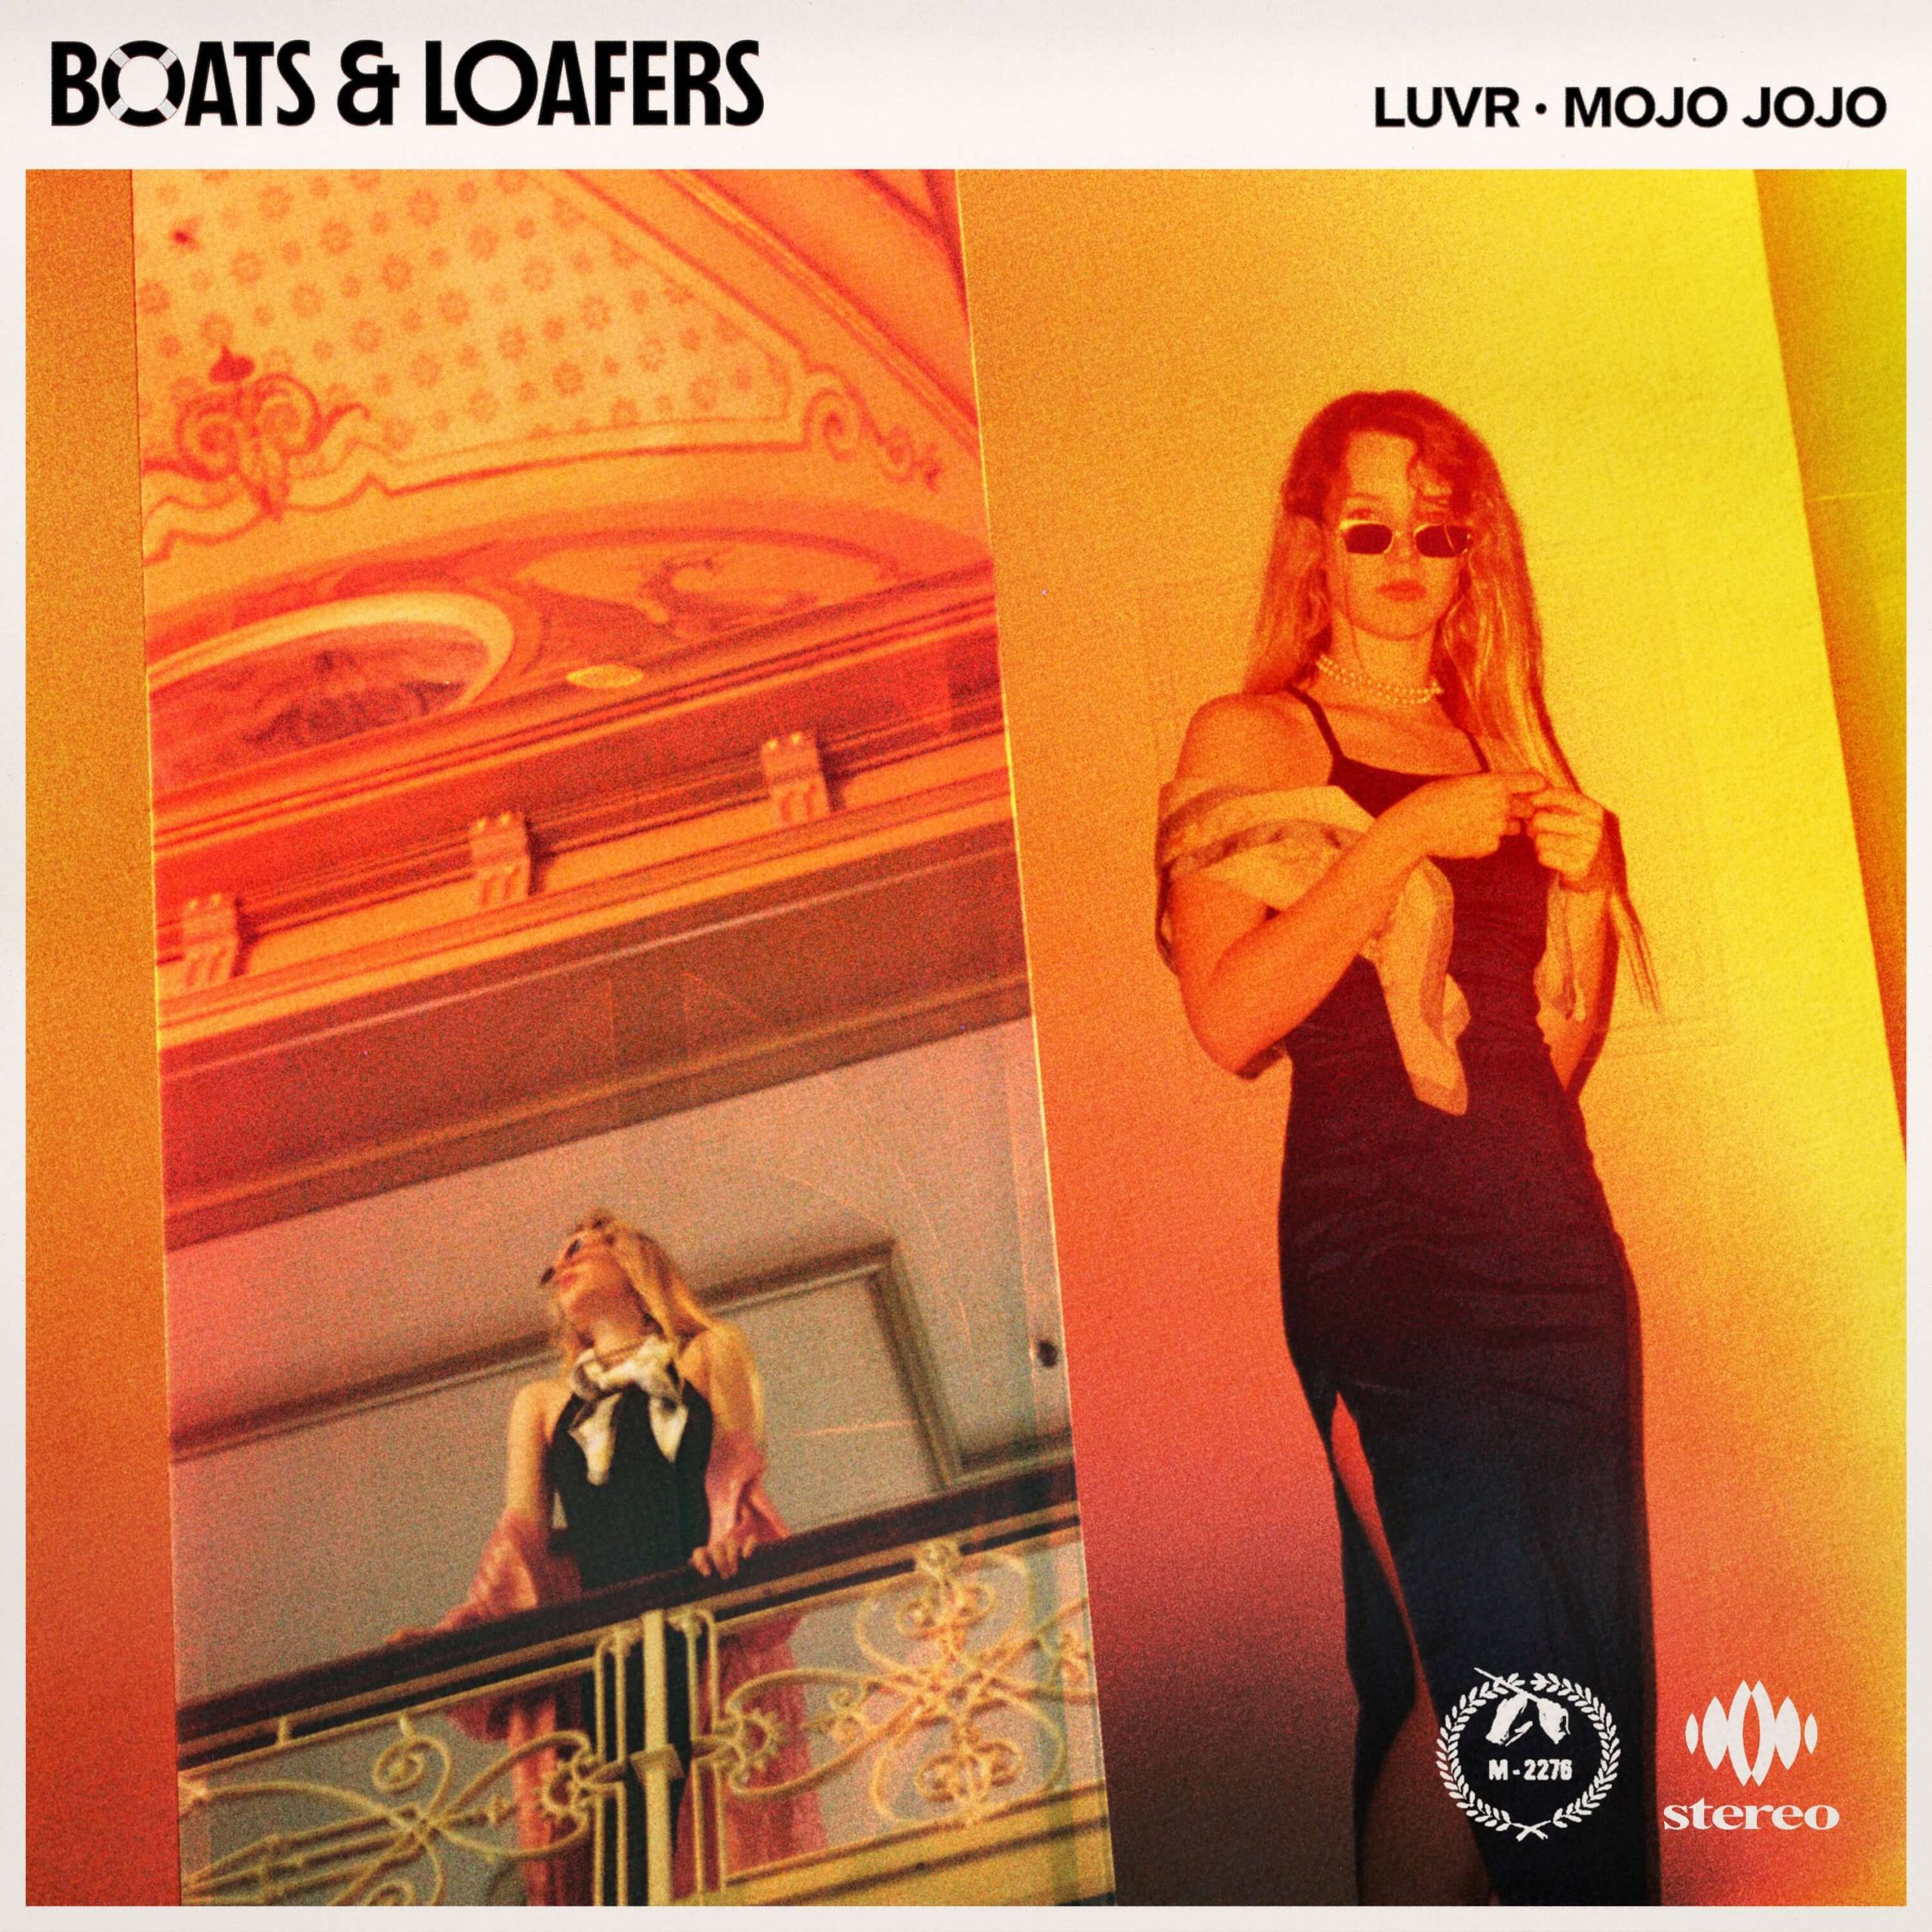 Boats-&-Loafers-Cover-Art-squashed